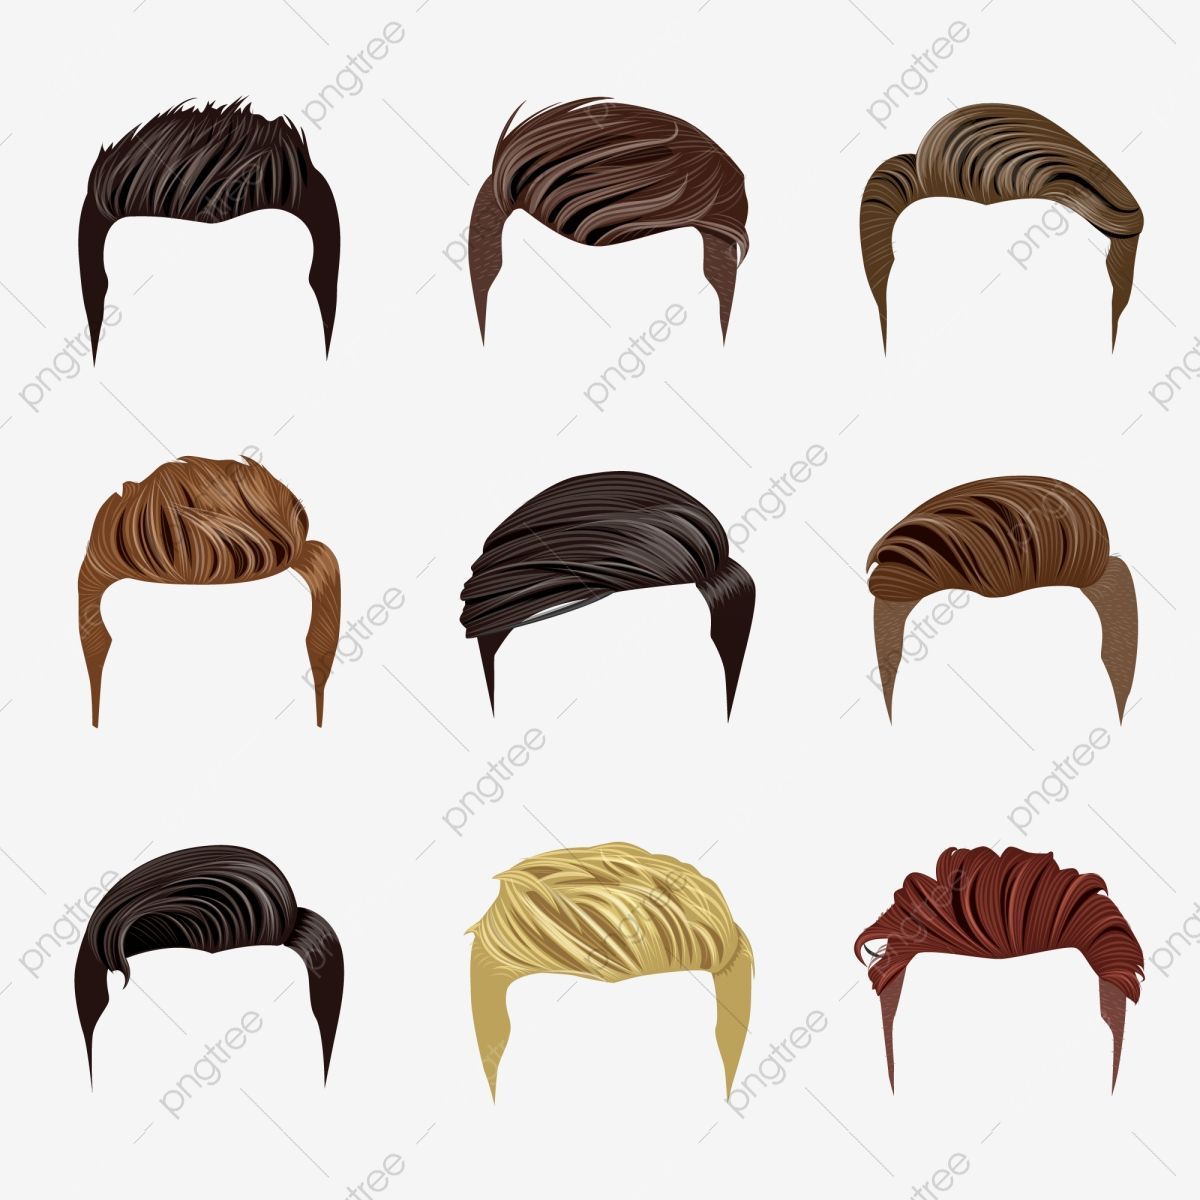 6 hairstyles For Men png ideas